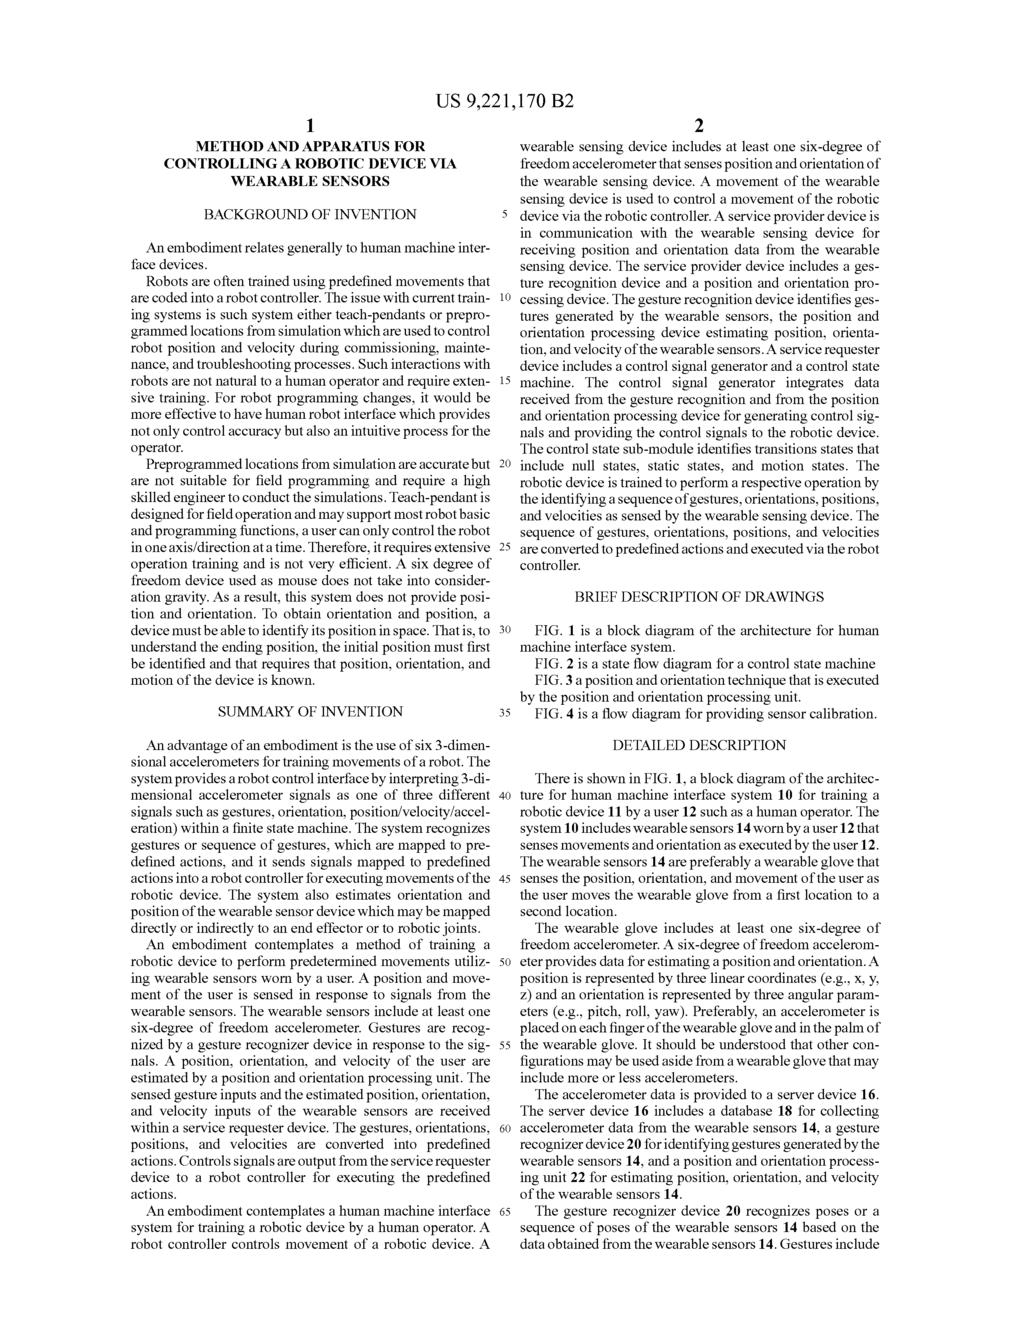 1. METHOD AND APPARATUS FOR CONTROLLING AROBOTC DEVICEVA WEARABLE SENSORS BACKGROUND OF INVENTION An embodiment relates generally to human machine inter face devices.